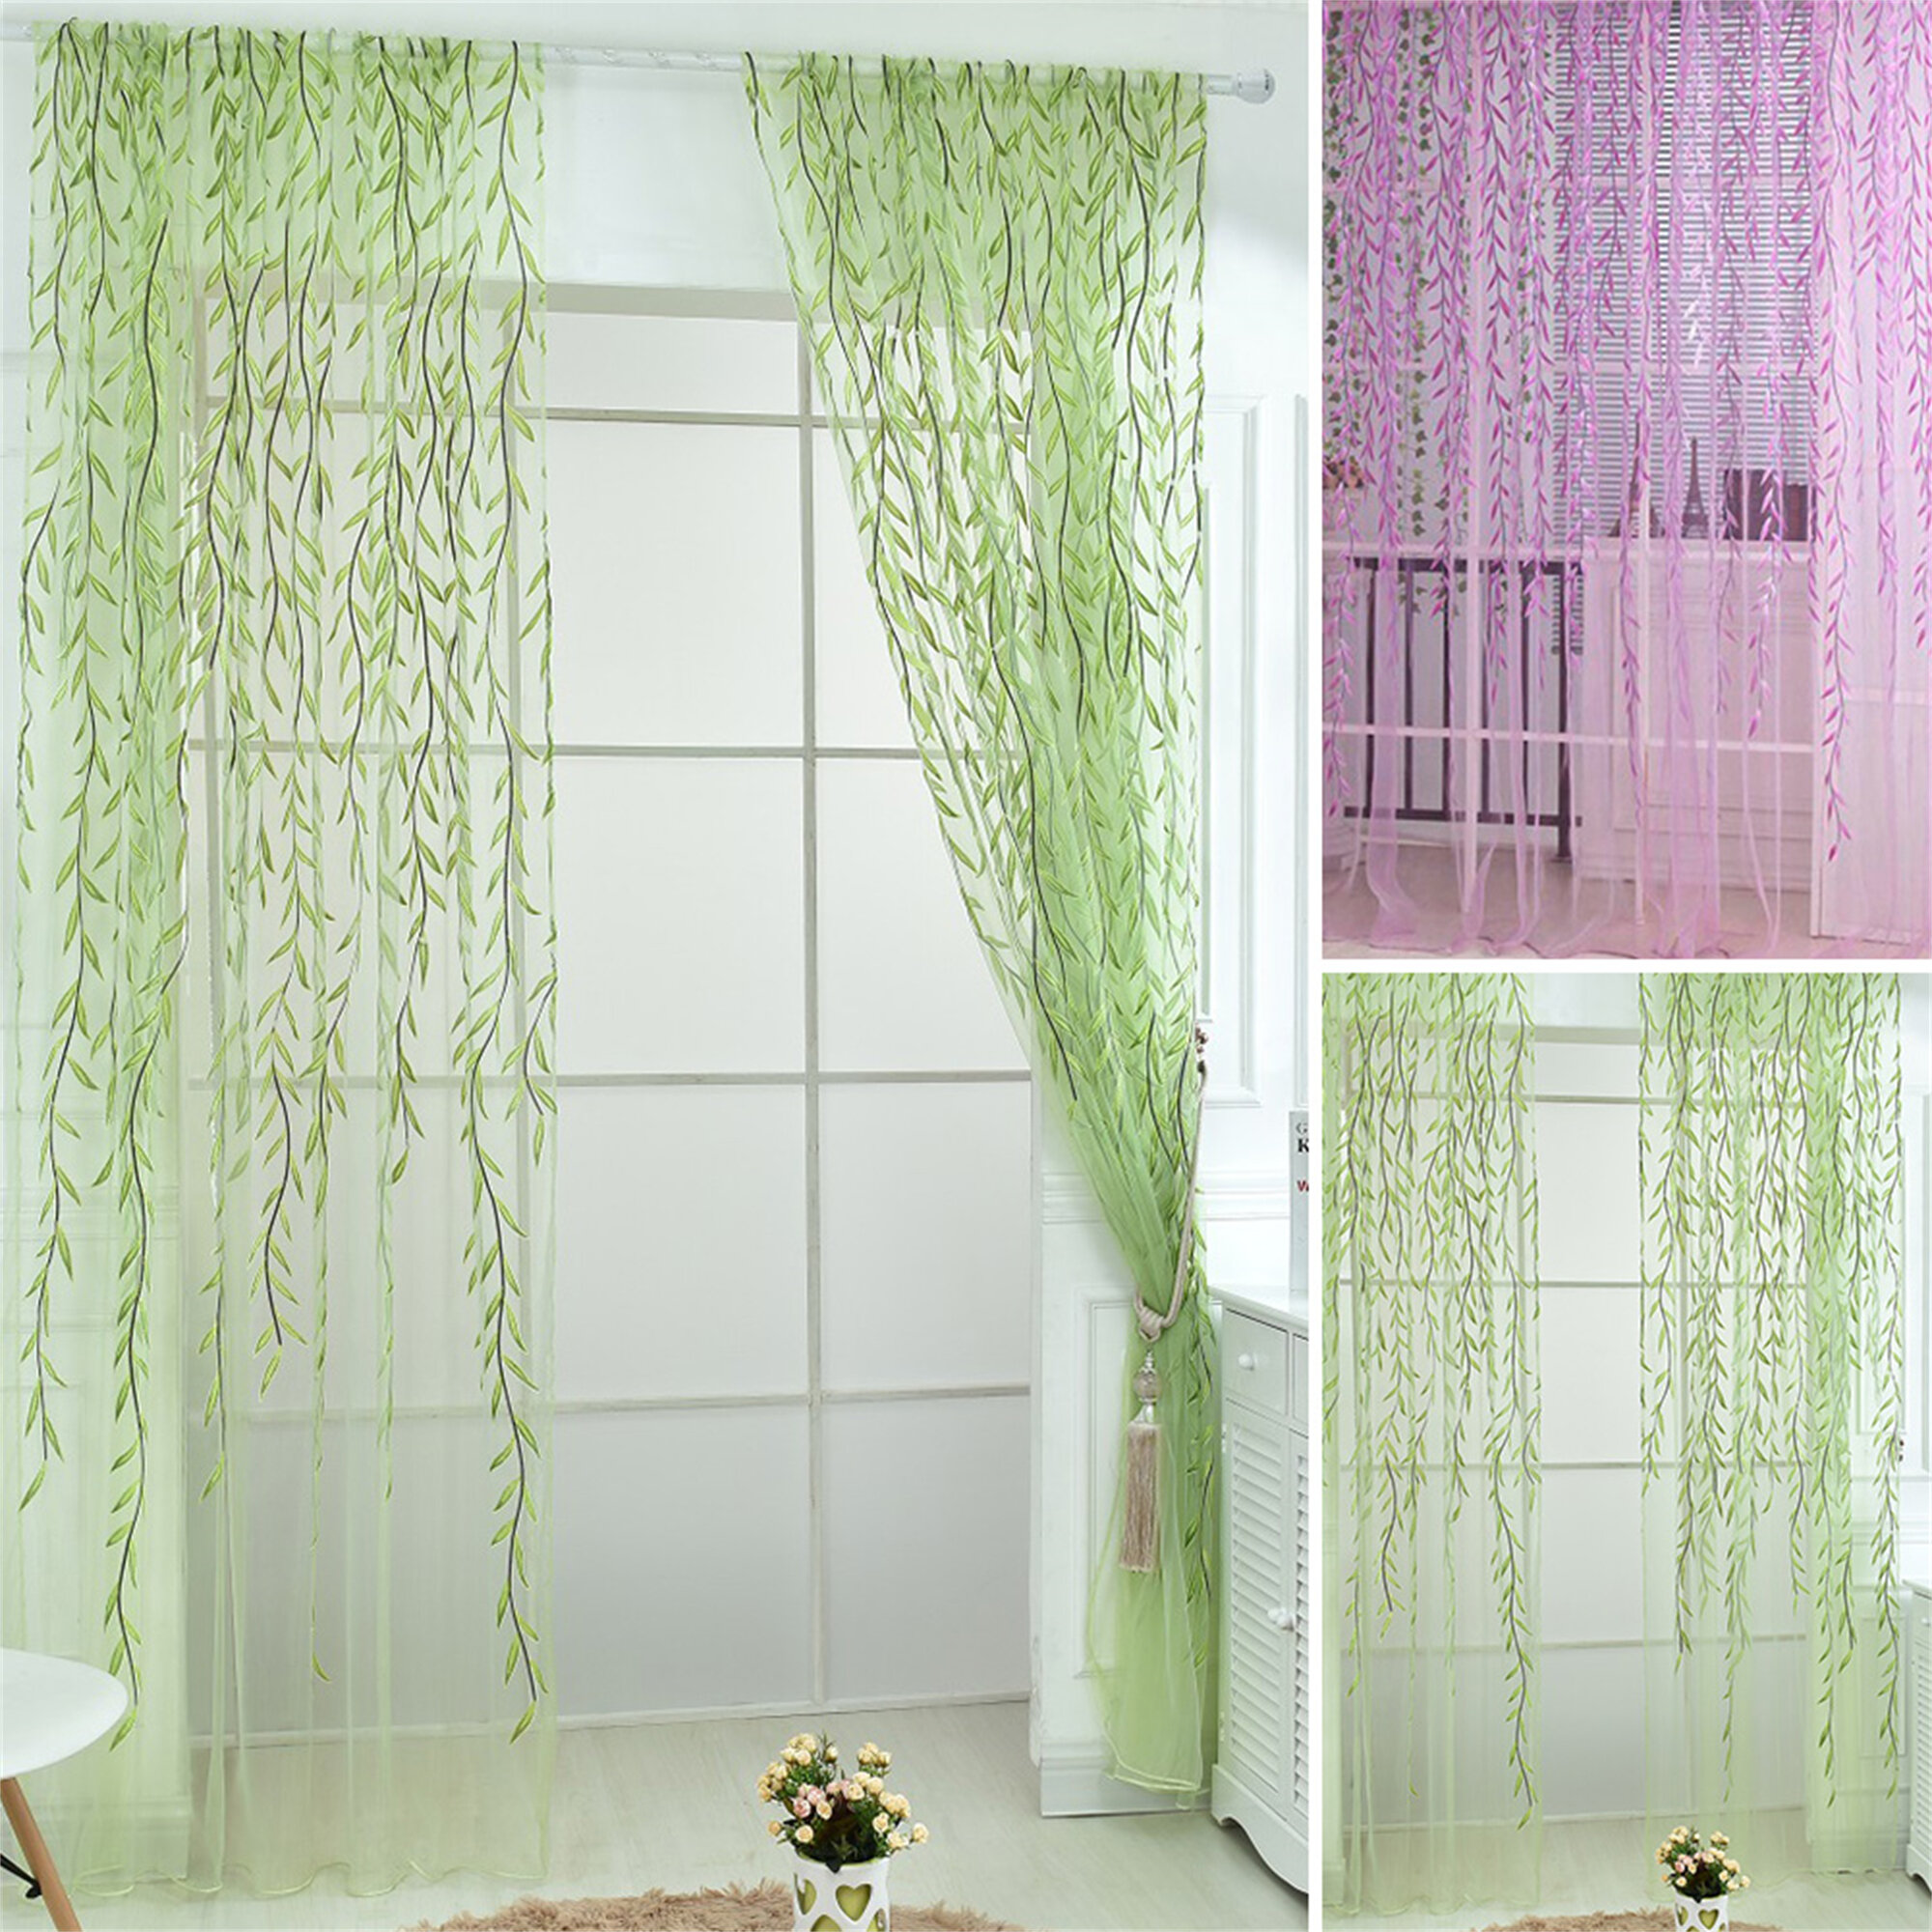 Floral Room Door Sheer Voile Window Valances Panel Drape Curtain Tulle Scarf 